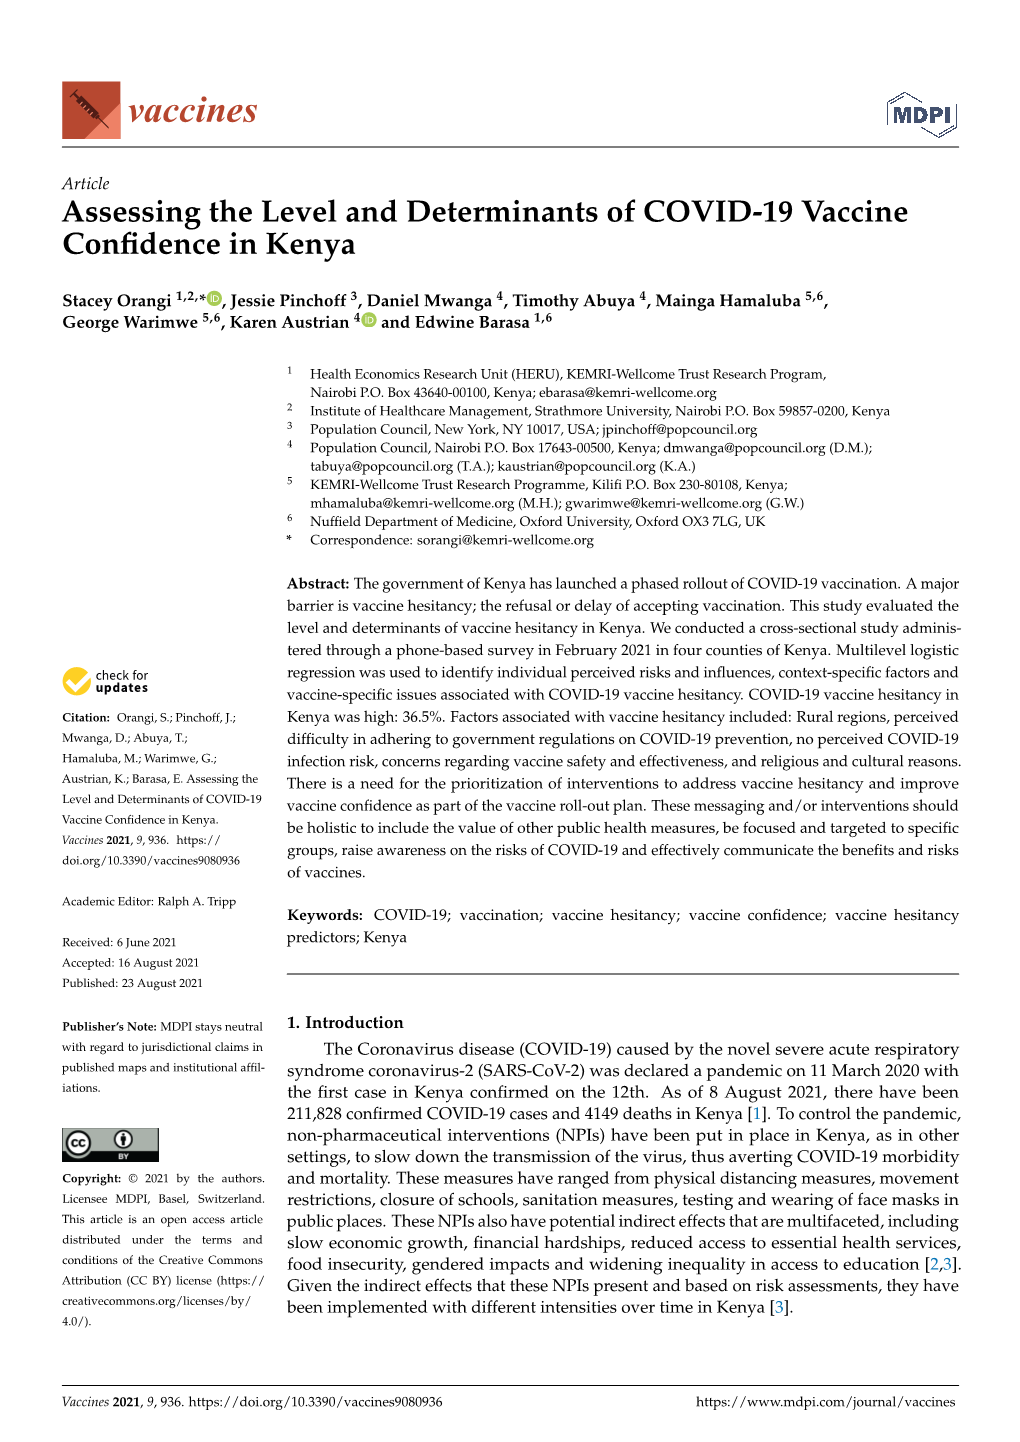 Assessing the Level and Determinants of COVID-19 Vaccine Confidence